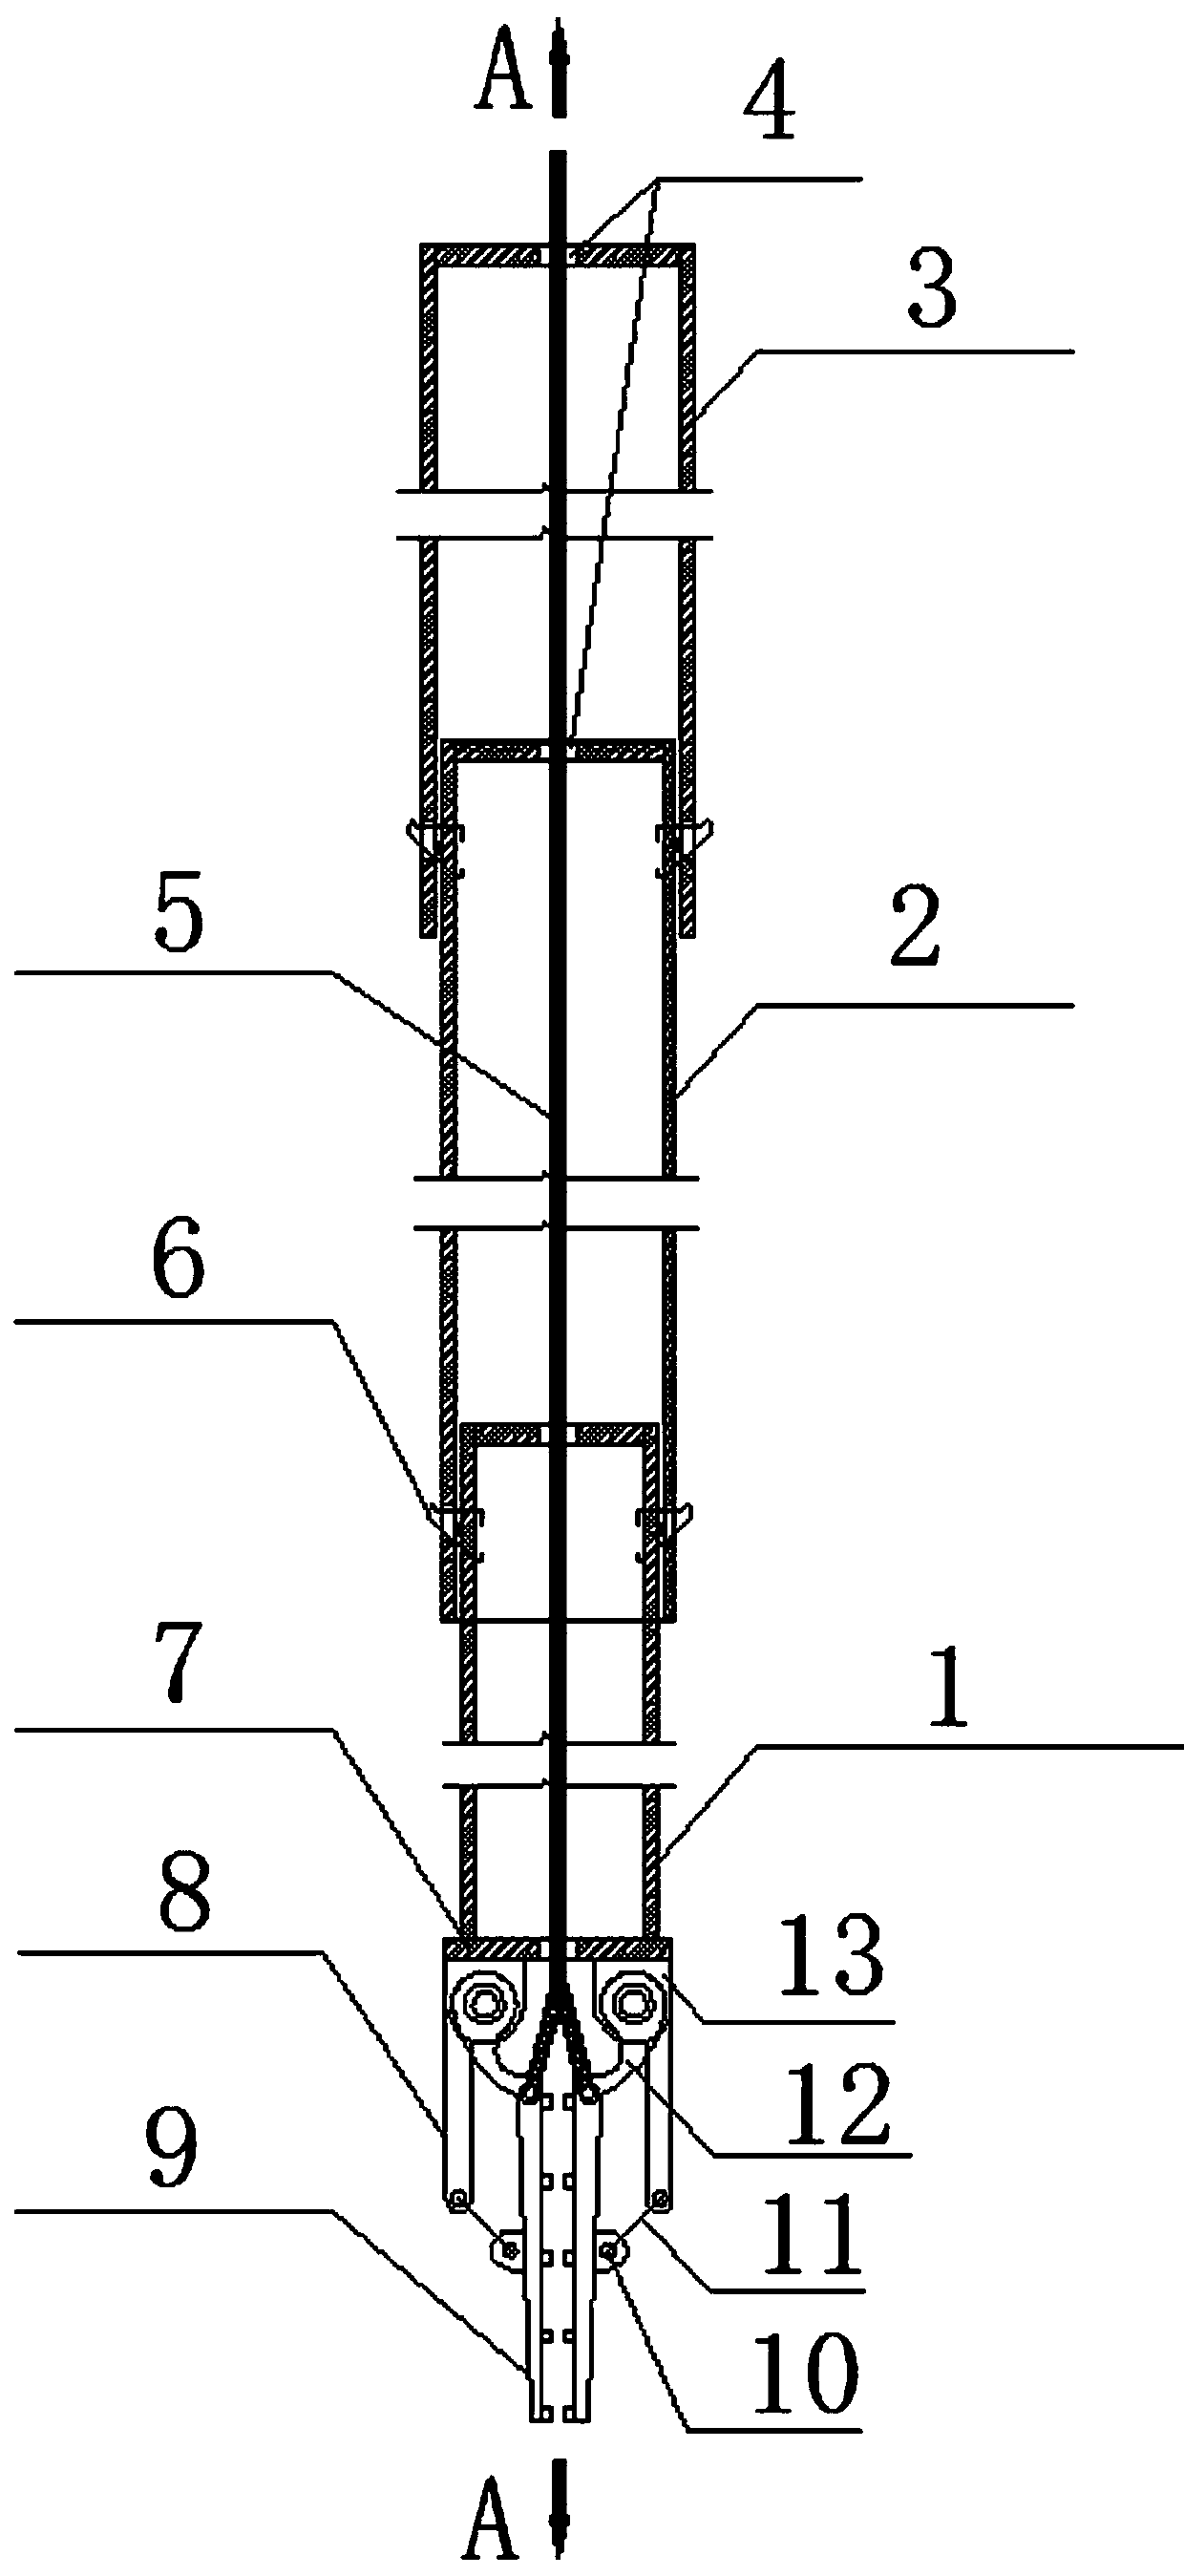 Underwater concrete pouring level measurement device and method